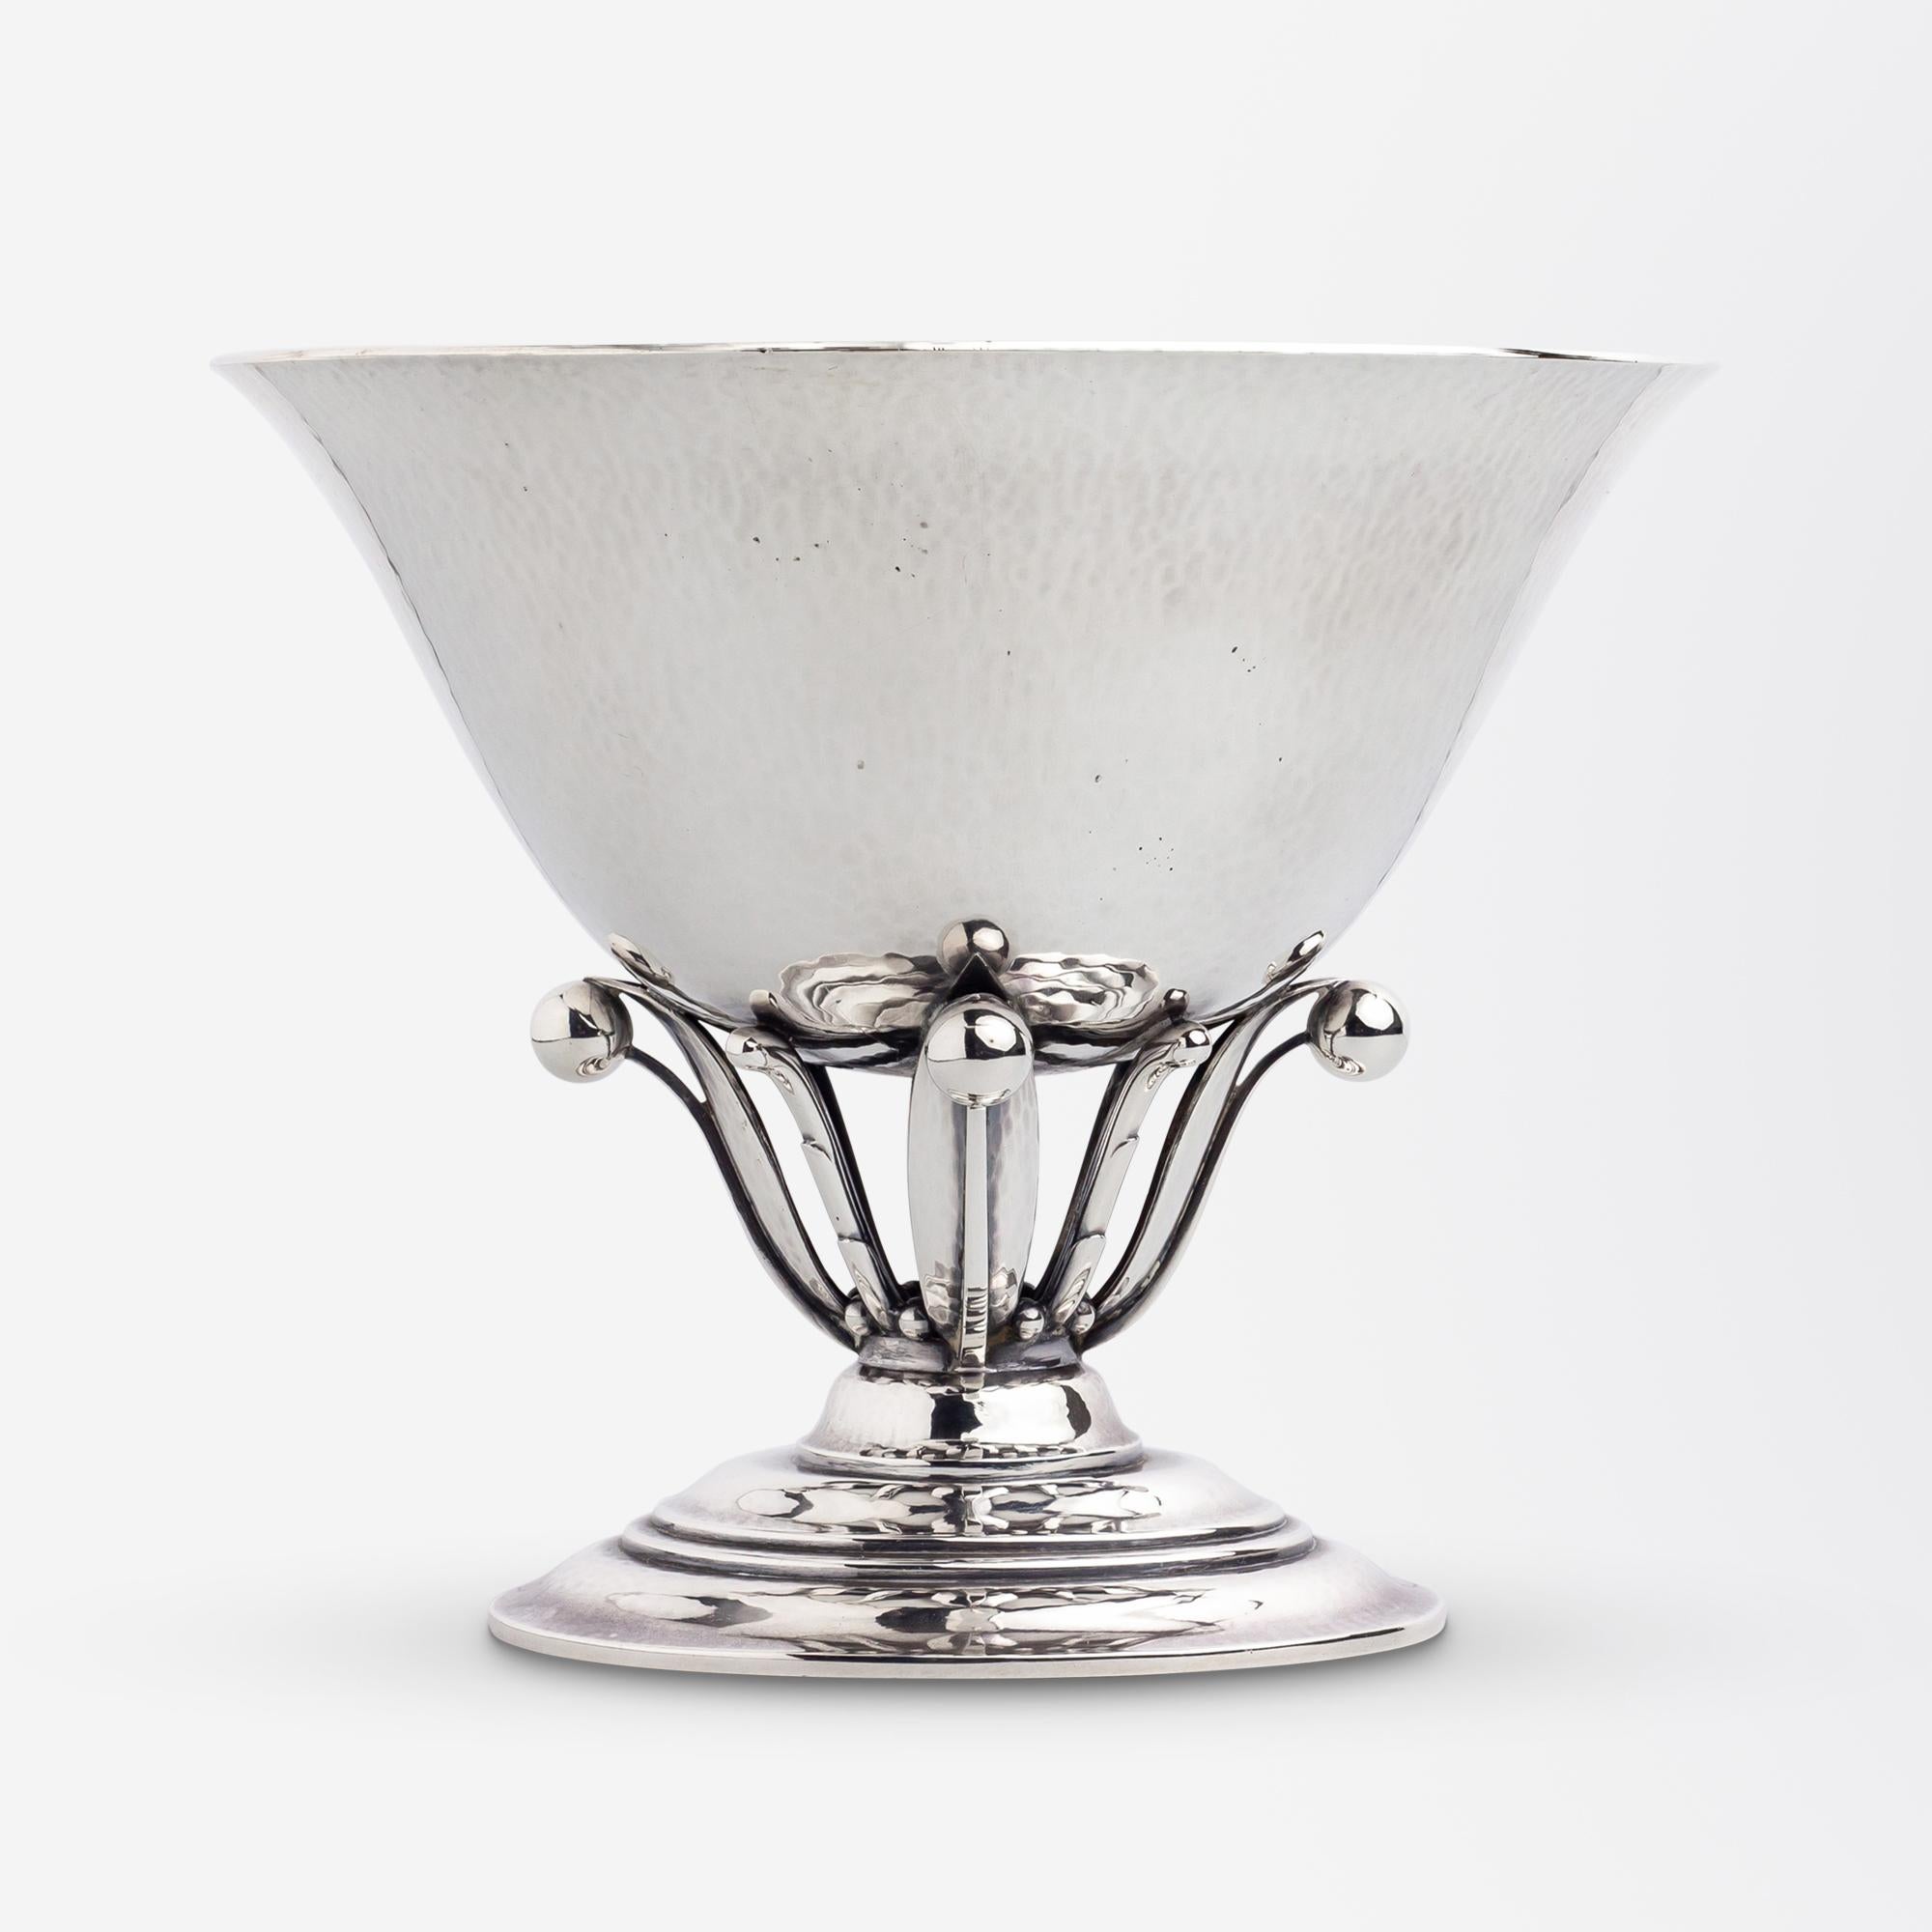 This rather beautiful sterling silver comport was made by Georg Jensen in a design by the famed craftsman Johan Rohde. The piece was first designed between 1912 and 1915, however this example has post 1945 Georg Jensen hallmarks. Johan Rohde